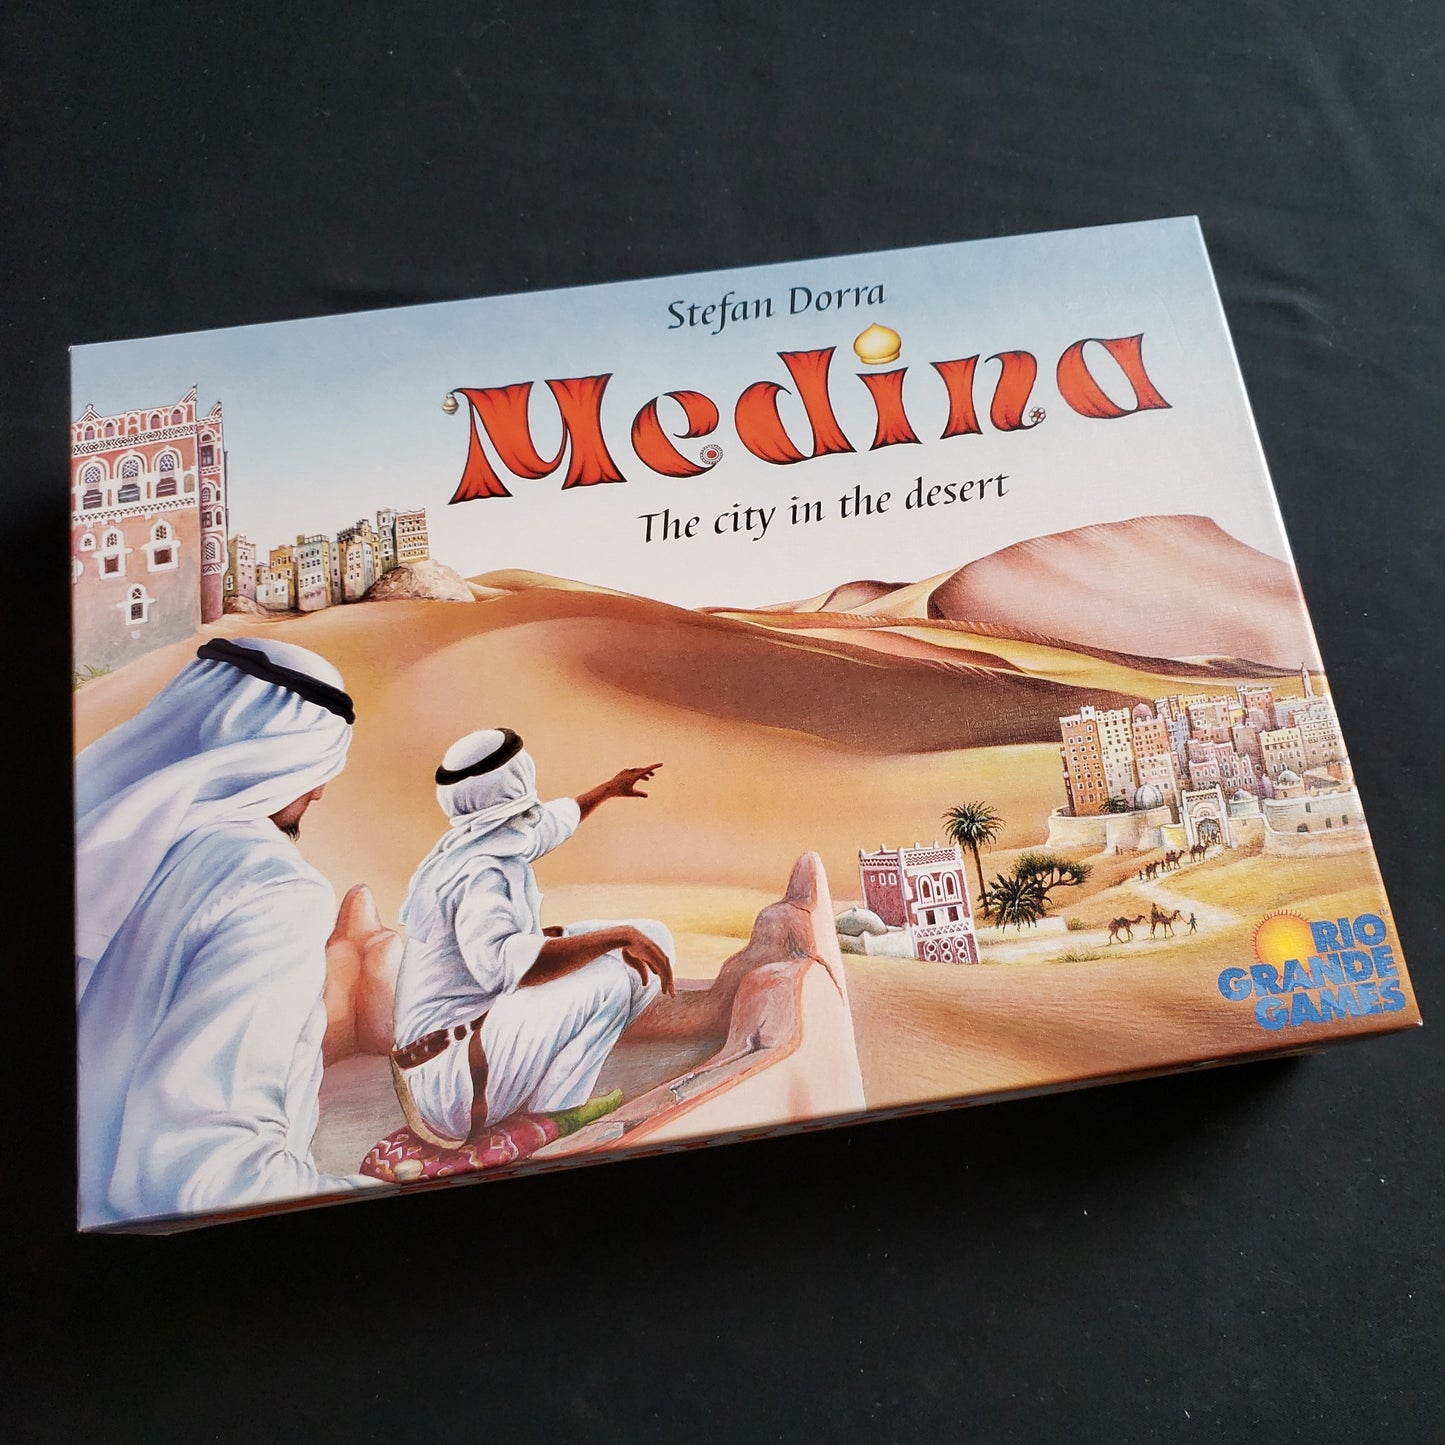 Image shows the front cover of the box of the Medina board game